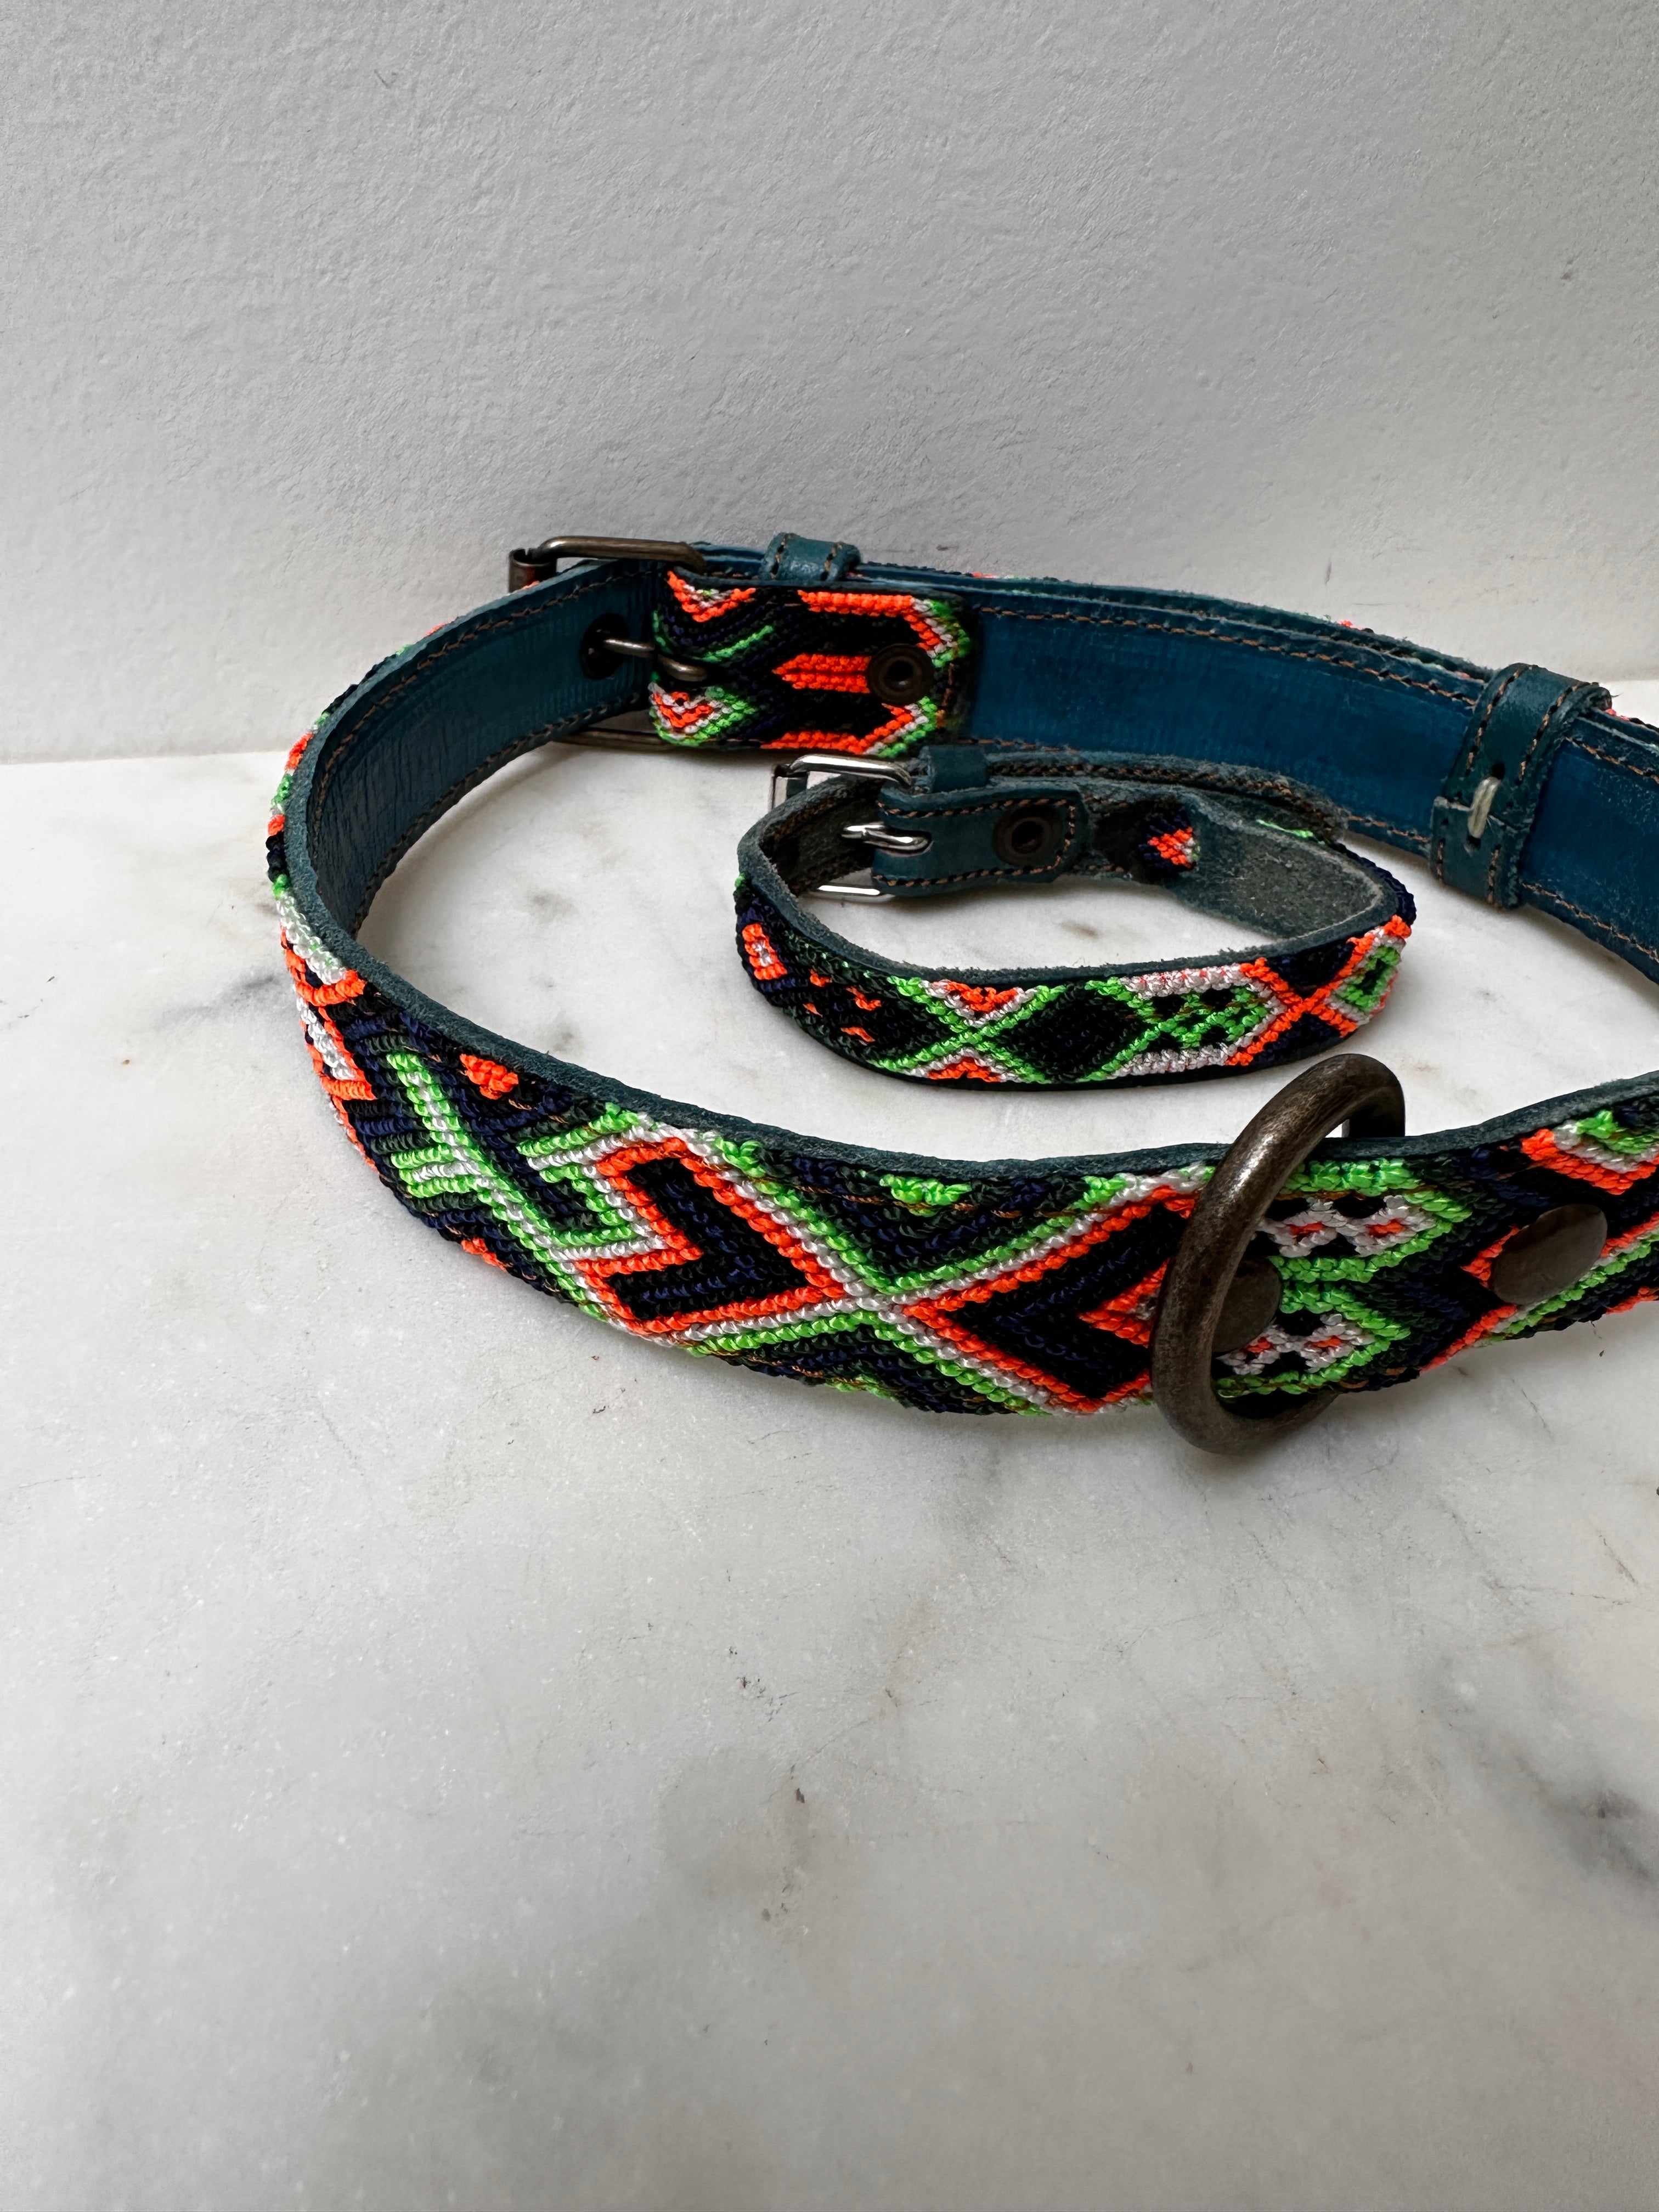 Future Nomads Homewares One Size Huichol Fully Embroidered Dog Collar L4